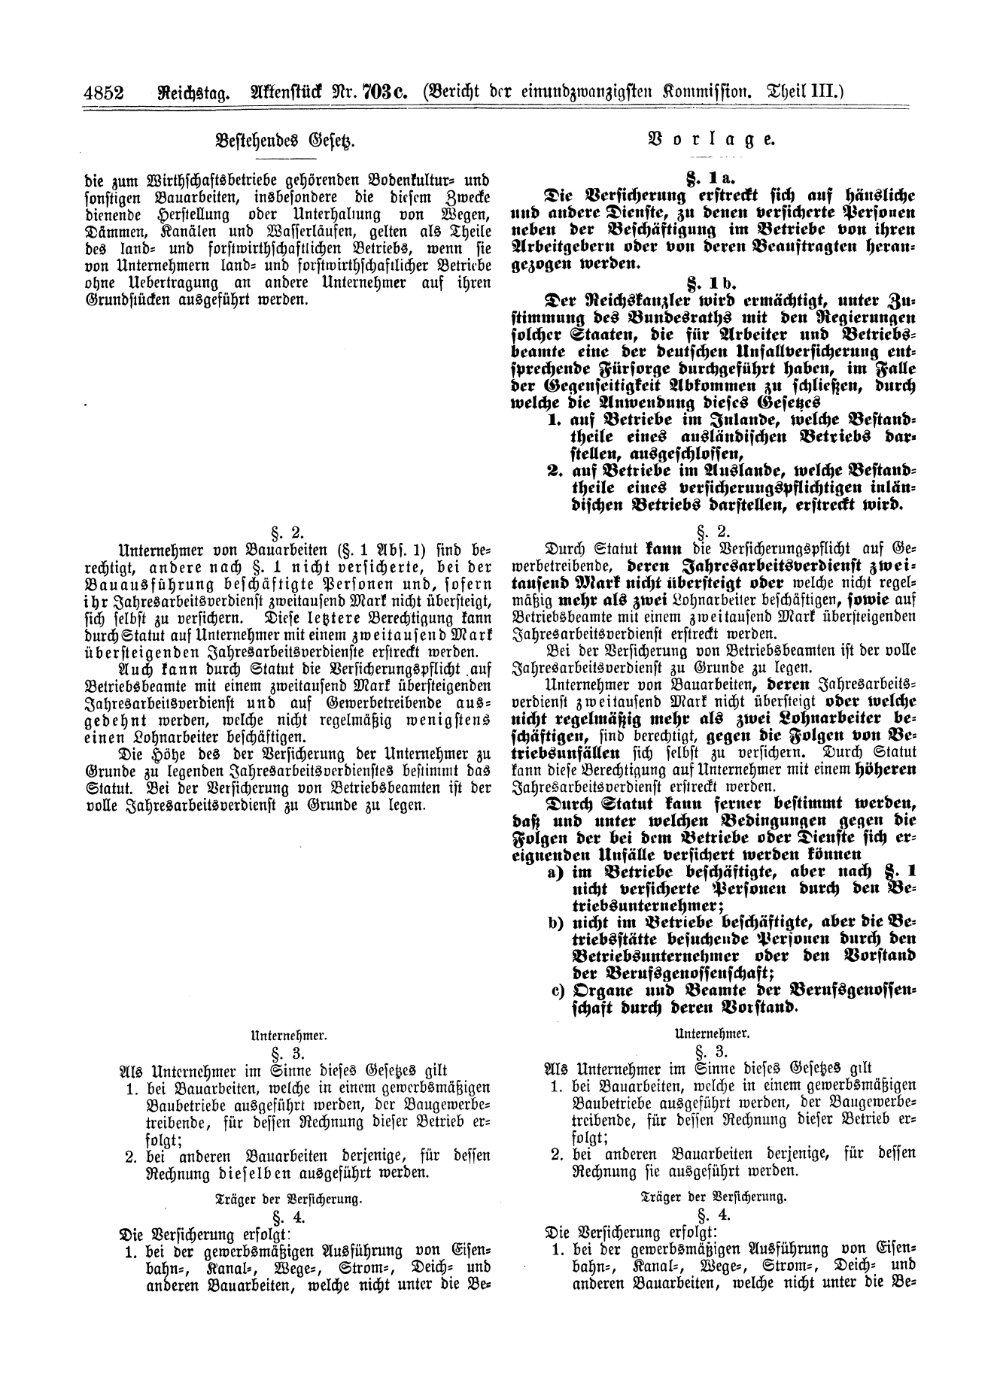 Scan of page 4852